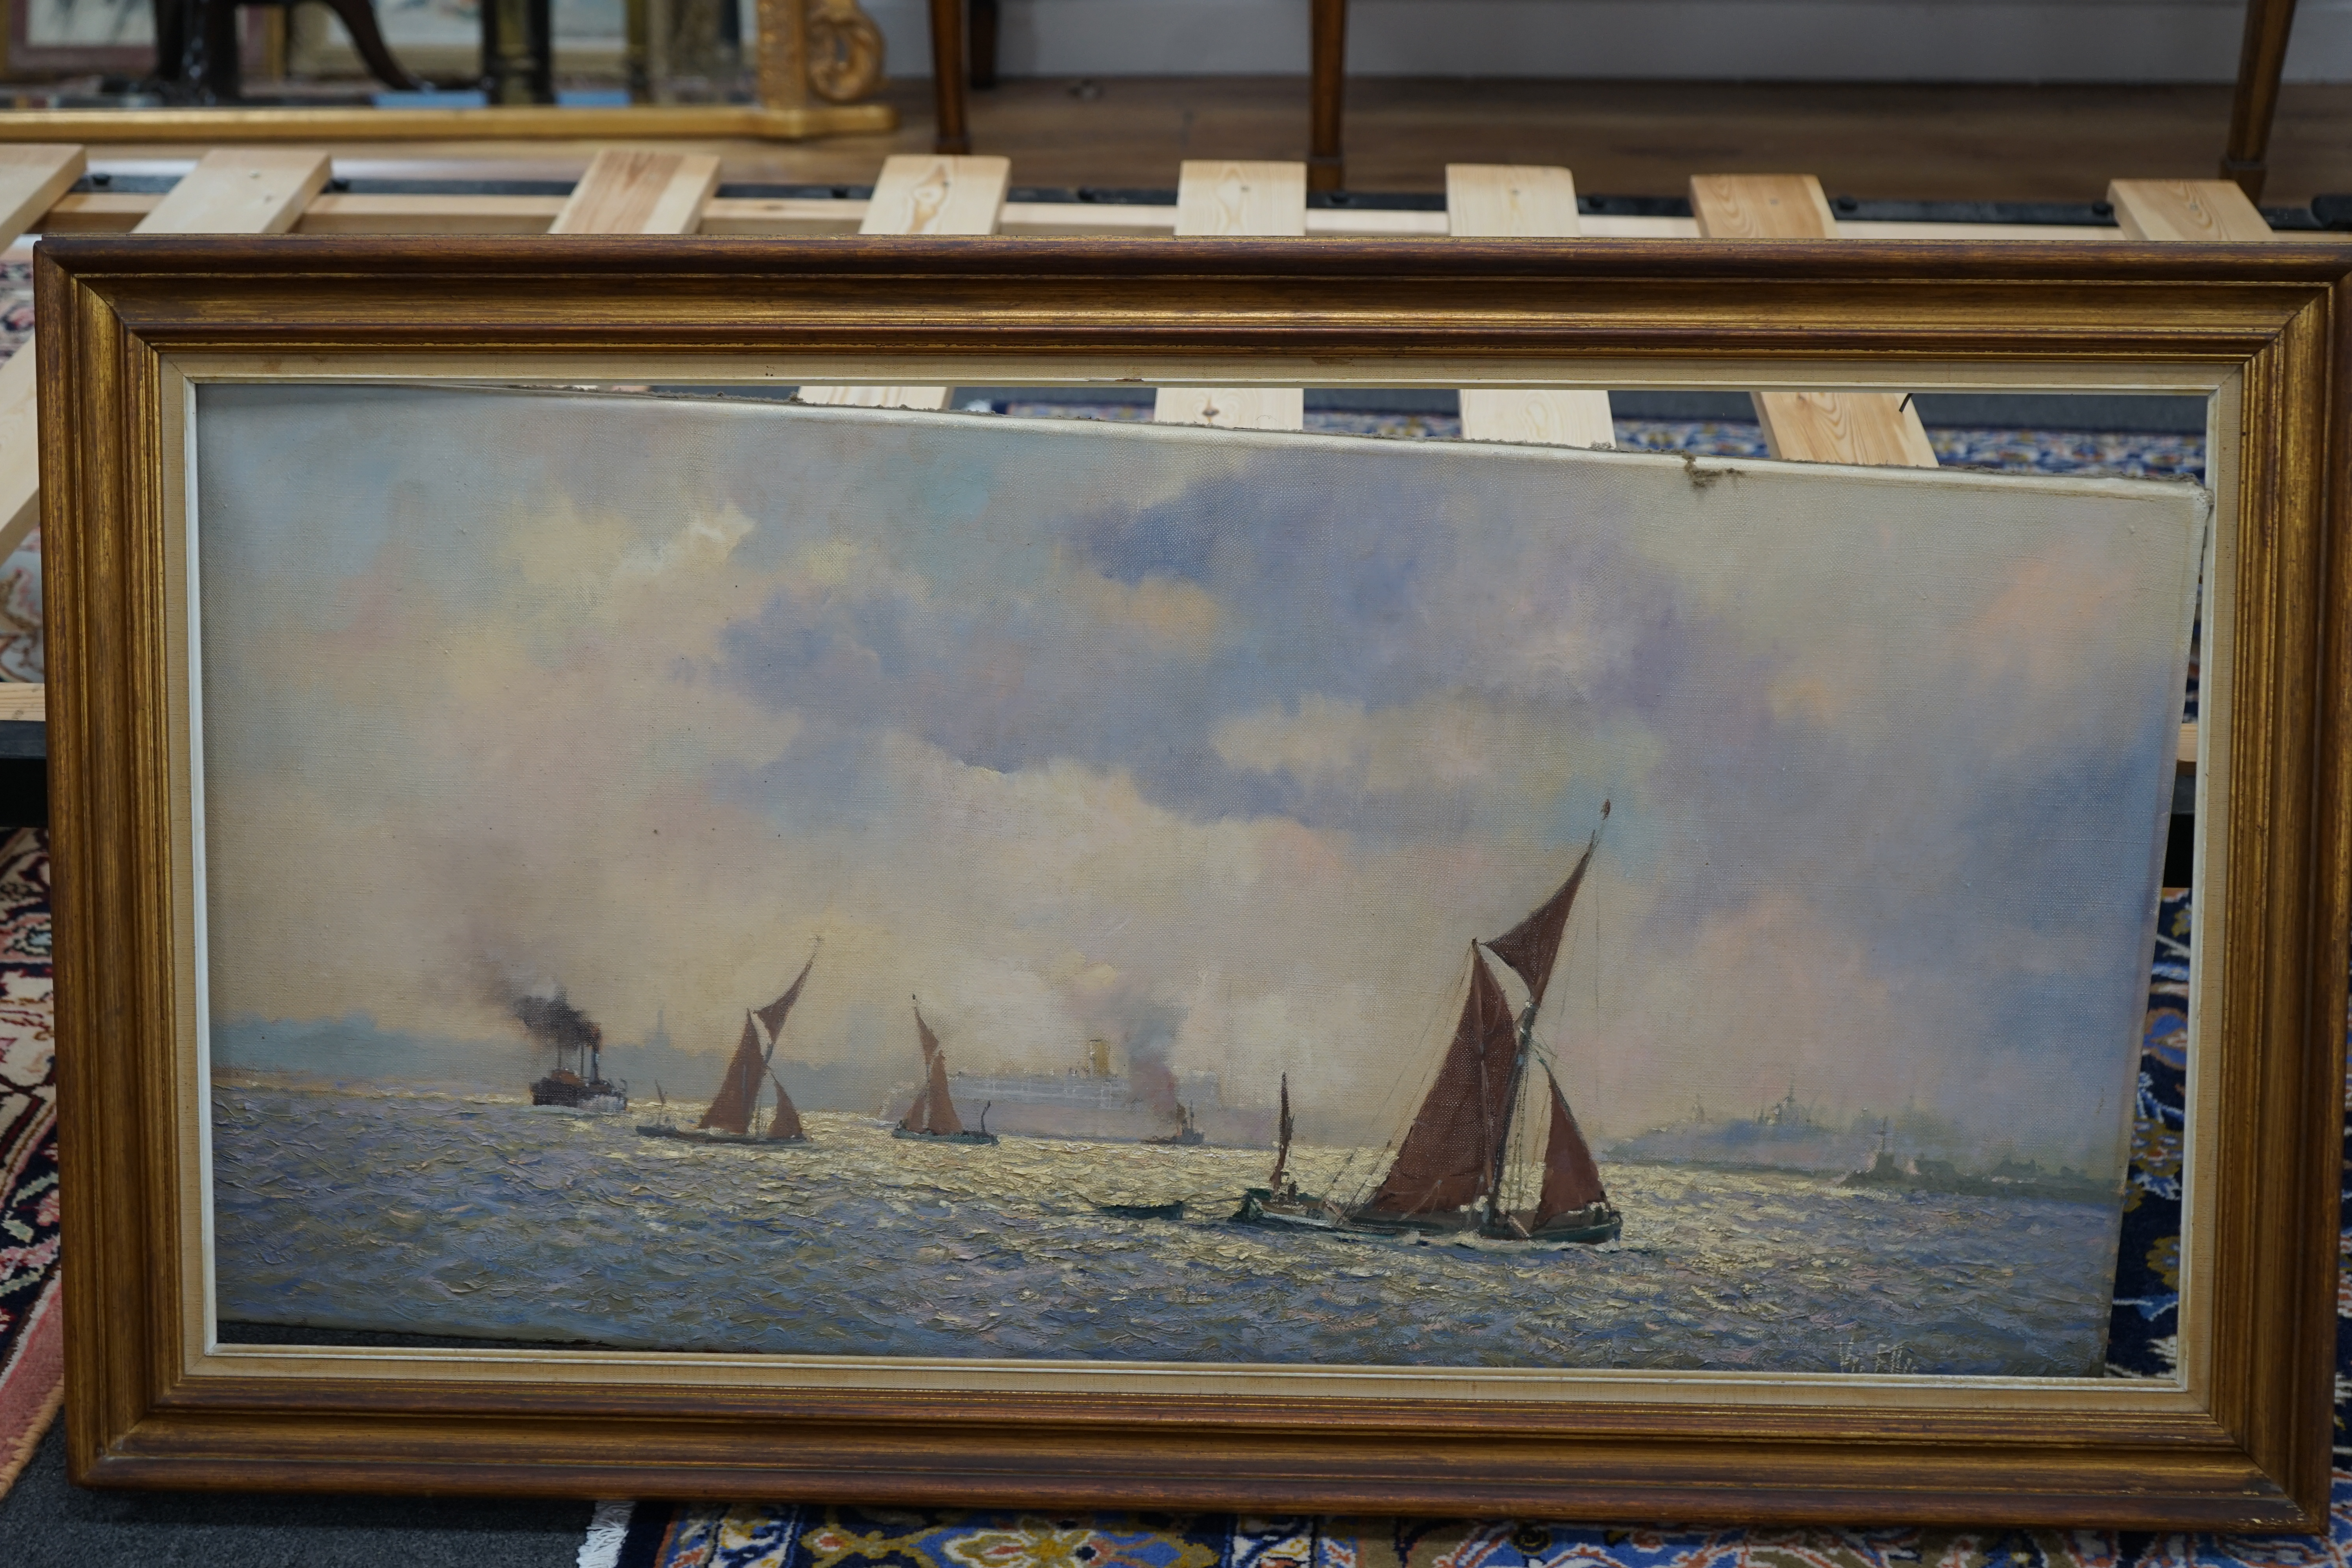 Victor William Ellis (1921-1984), oil on canvas, Estuary scene with boats, signed, 50 x 100cm. Condition - good